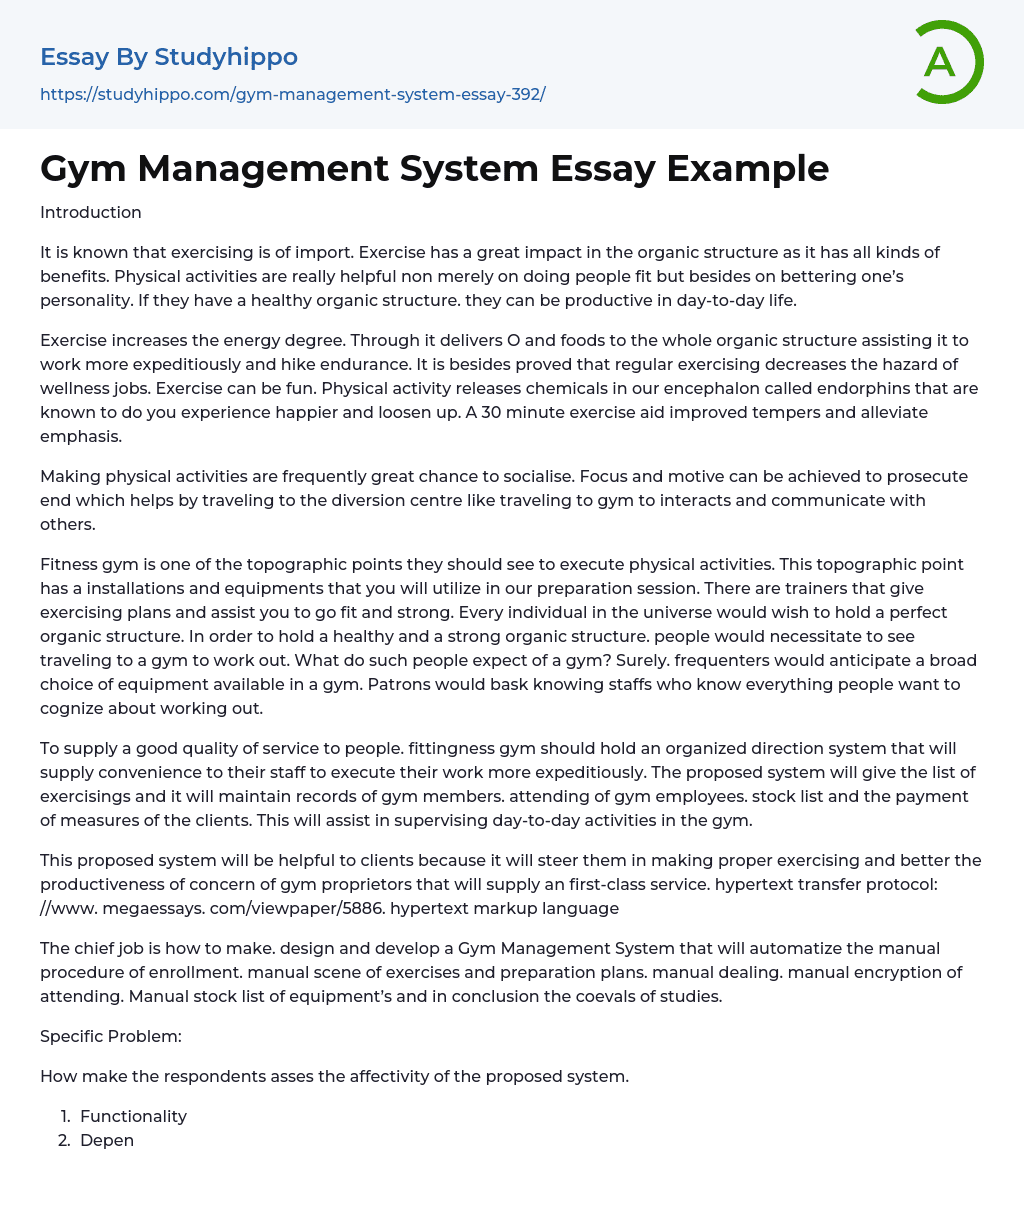 Gym Management System Essay Example